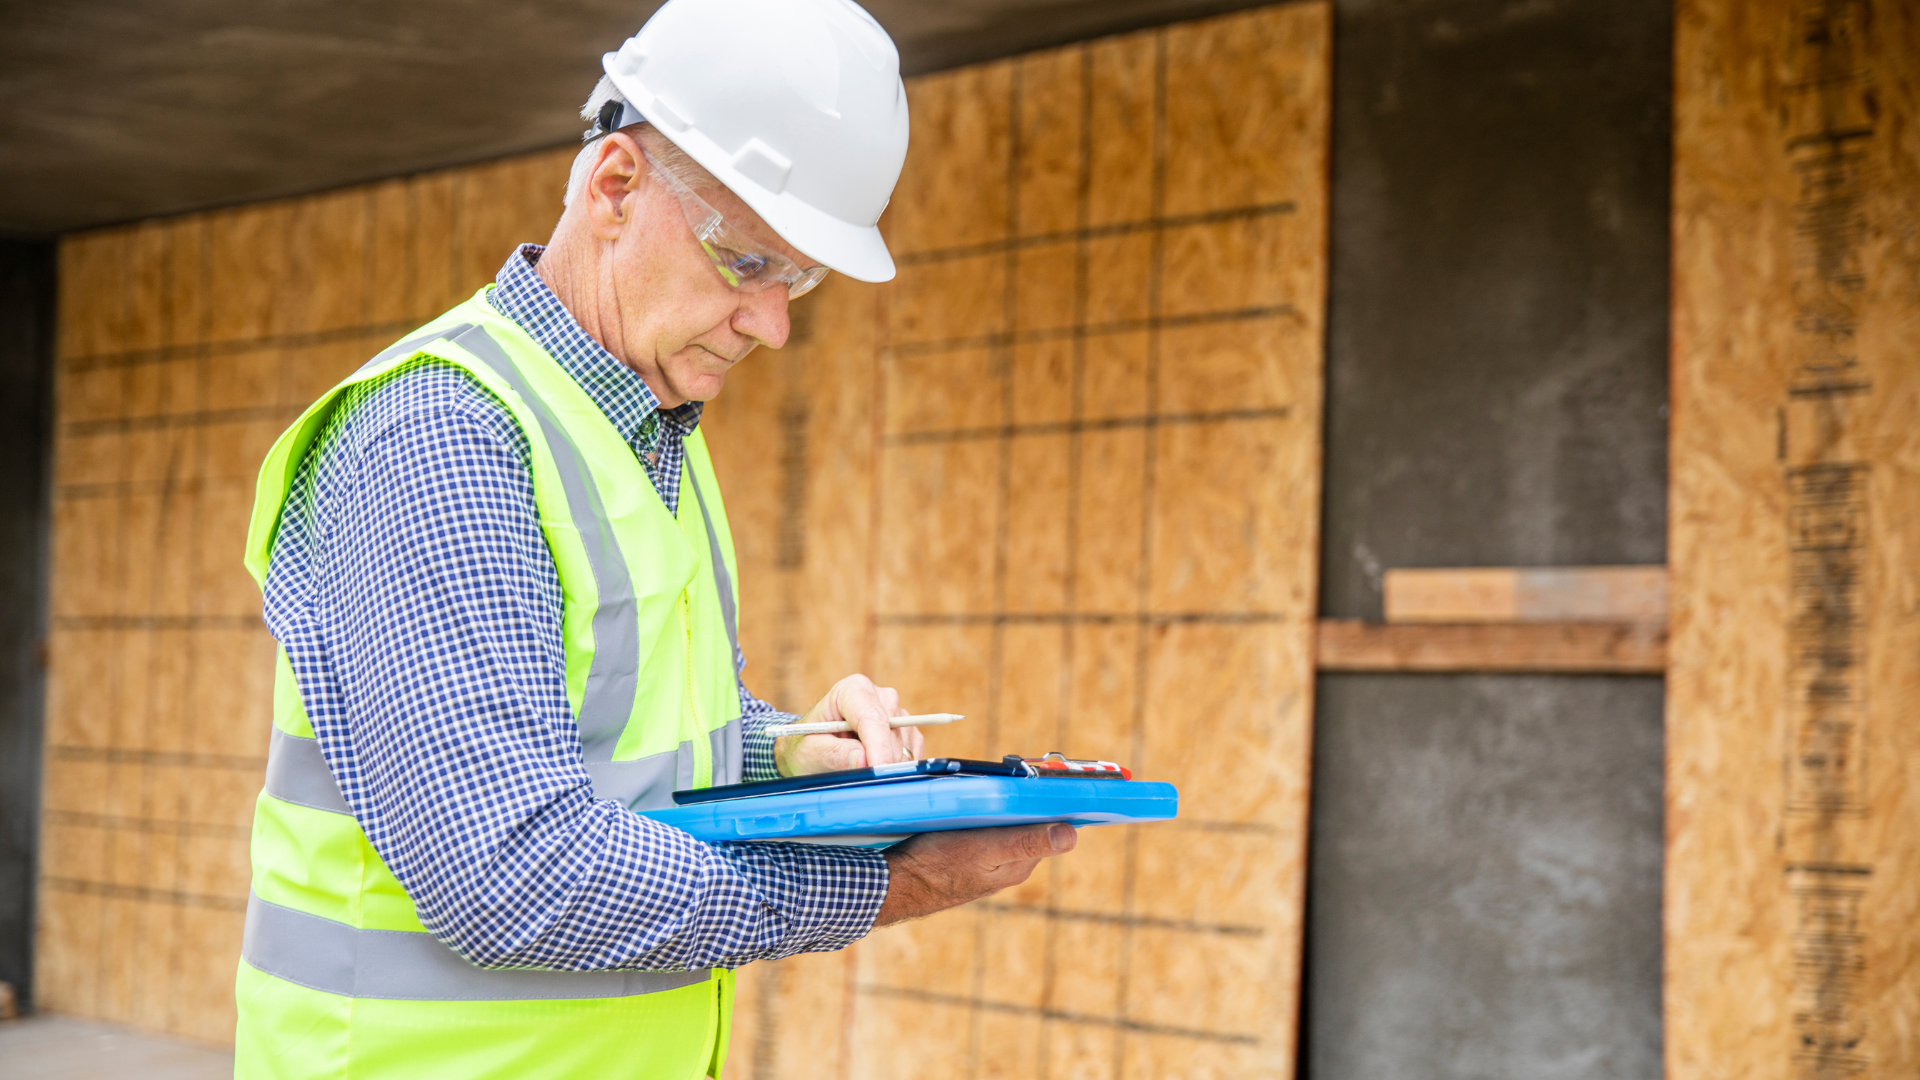 An older, male construction worker wearing a hard hat using a tablet on site